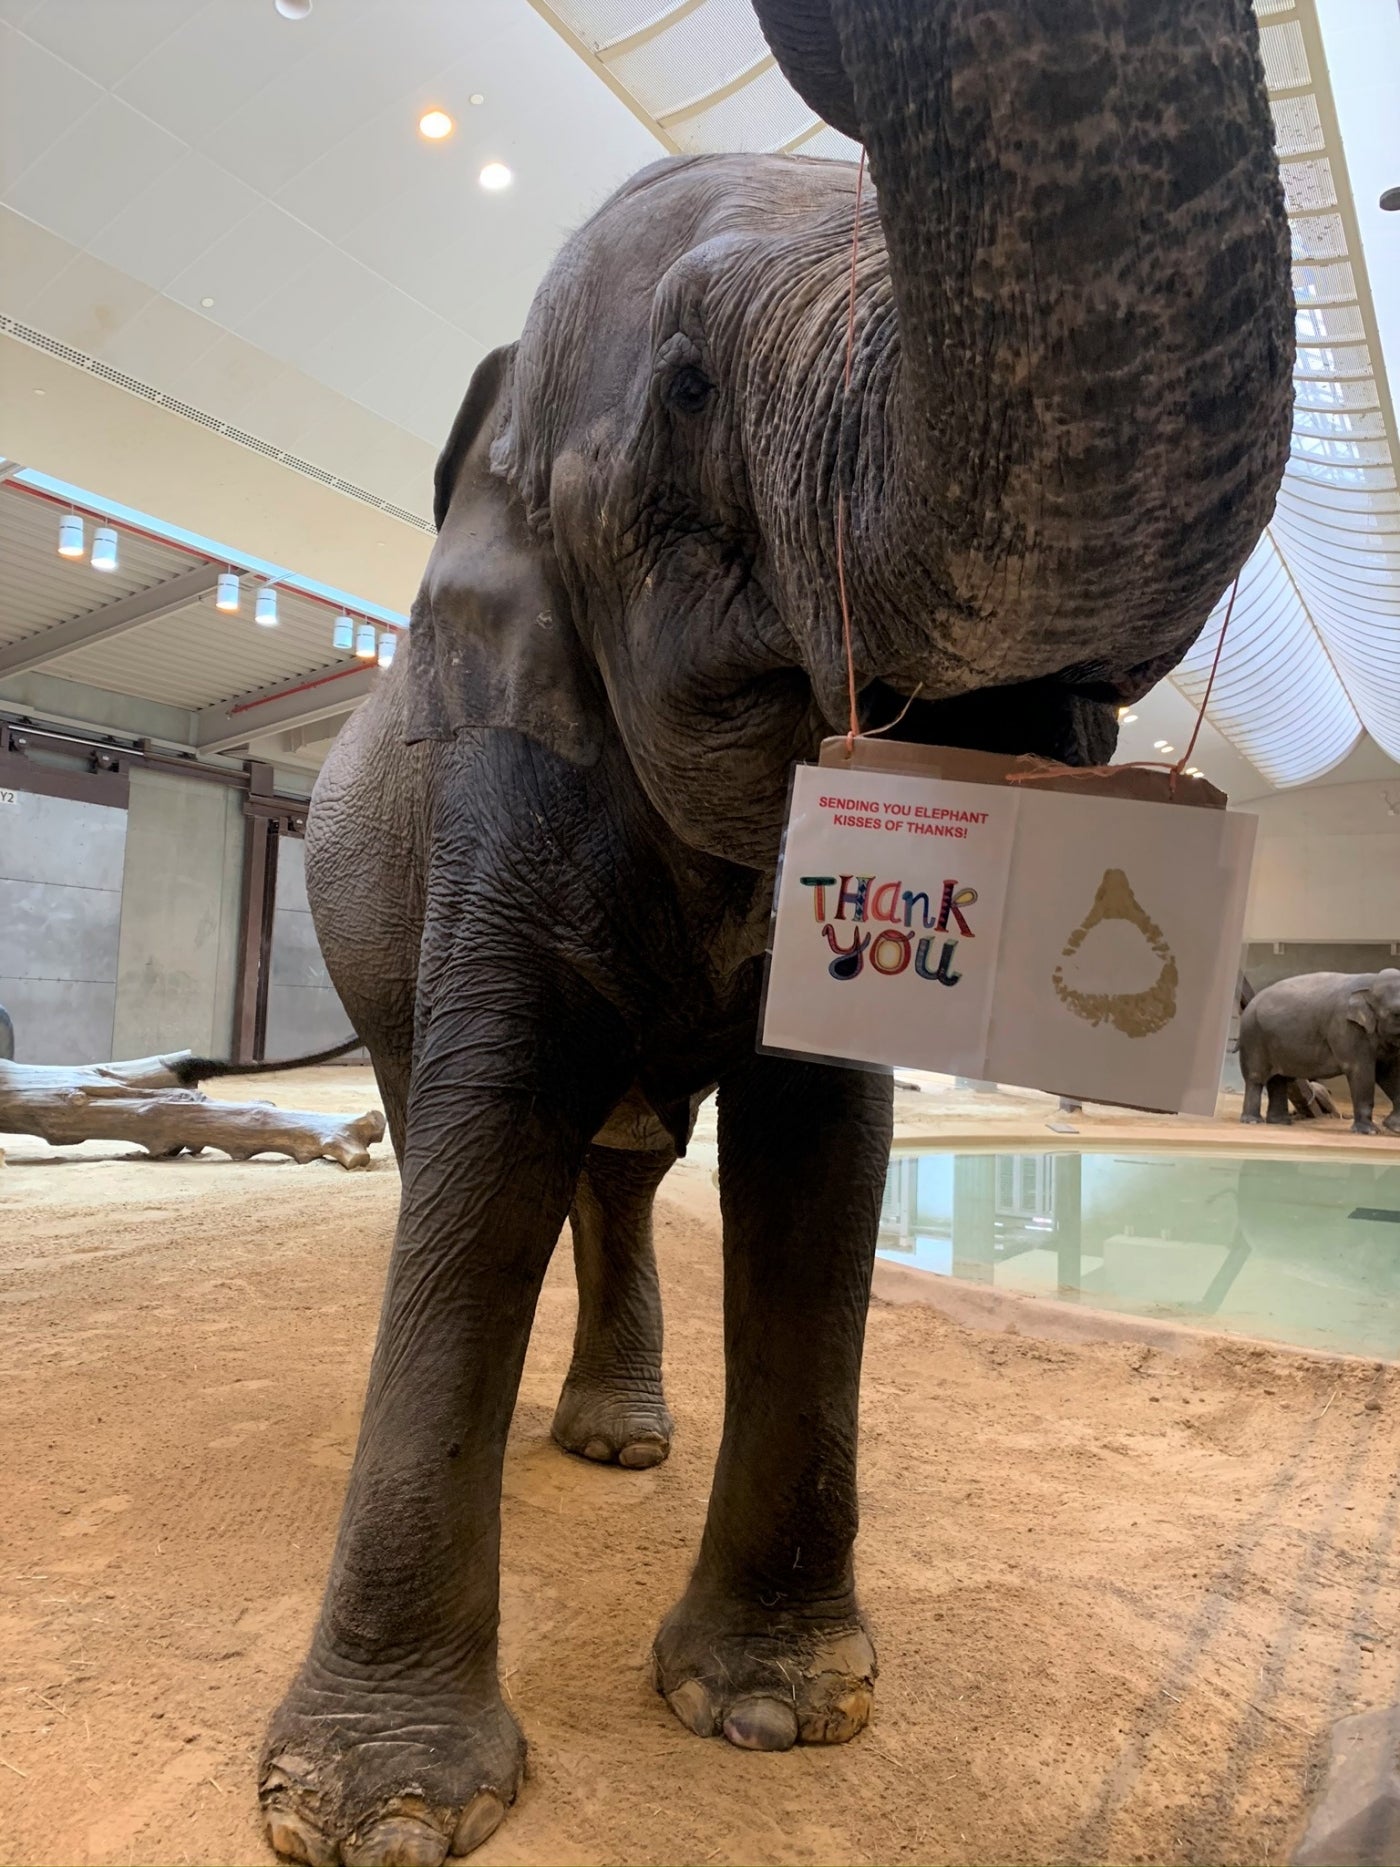 An Asian elephant in the Elephant Community Center uses its trunk to hold up a sign thanking volunteers. The sign says "Sending you elephant kisses of thanks. Thank you." and the right side of the sign has an elephant trunk print